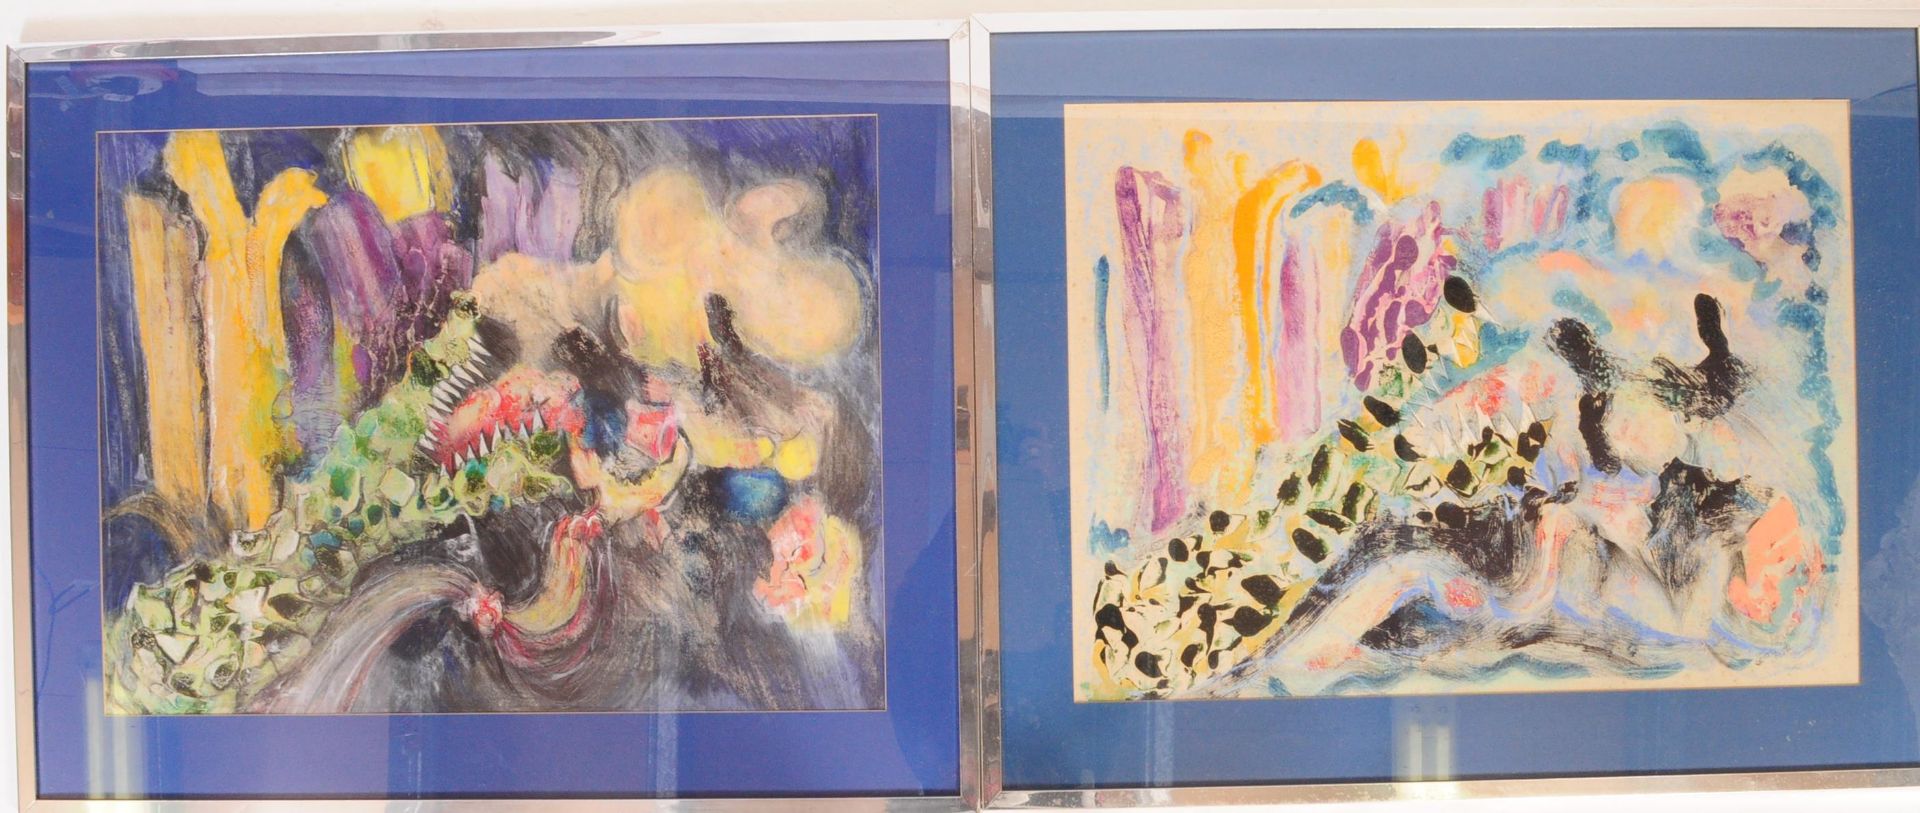 SARAH EASBY (BRISTOL) - PAIR OF 1992 MIXED MEDIA PAINTINGS - Image 2 of 8